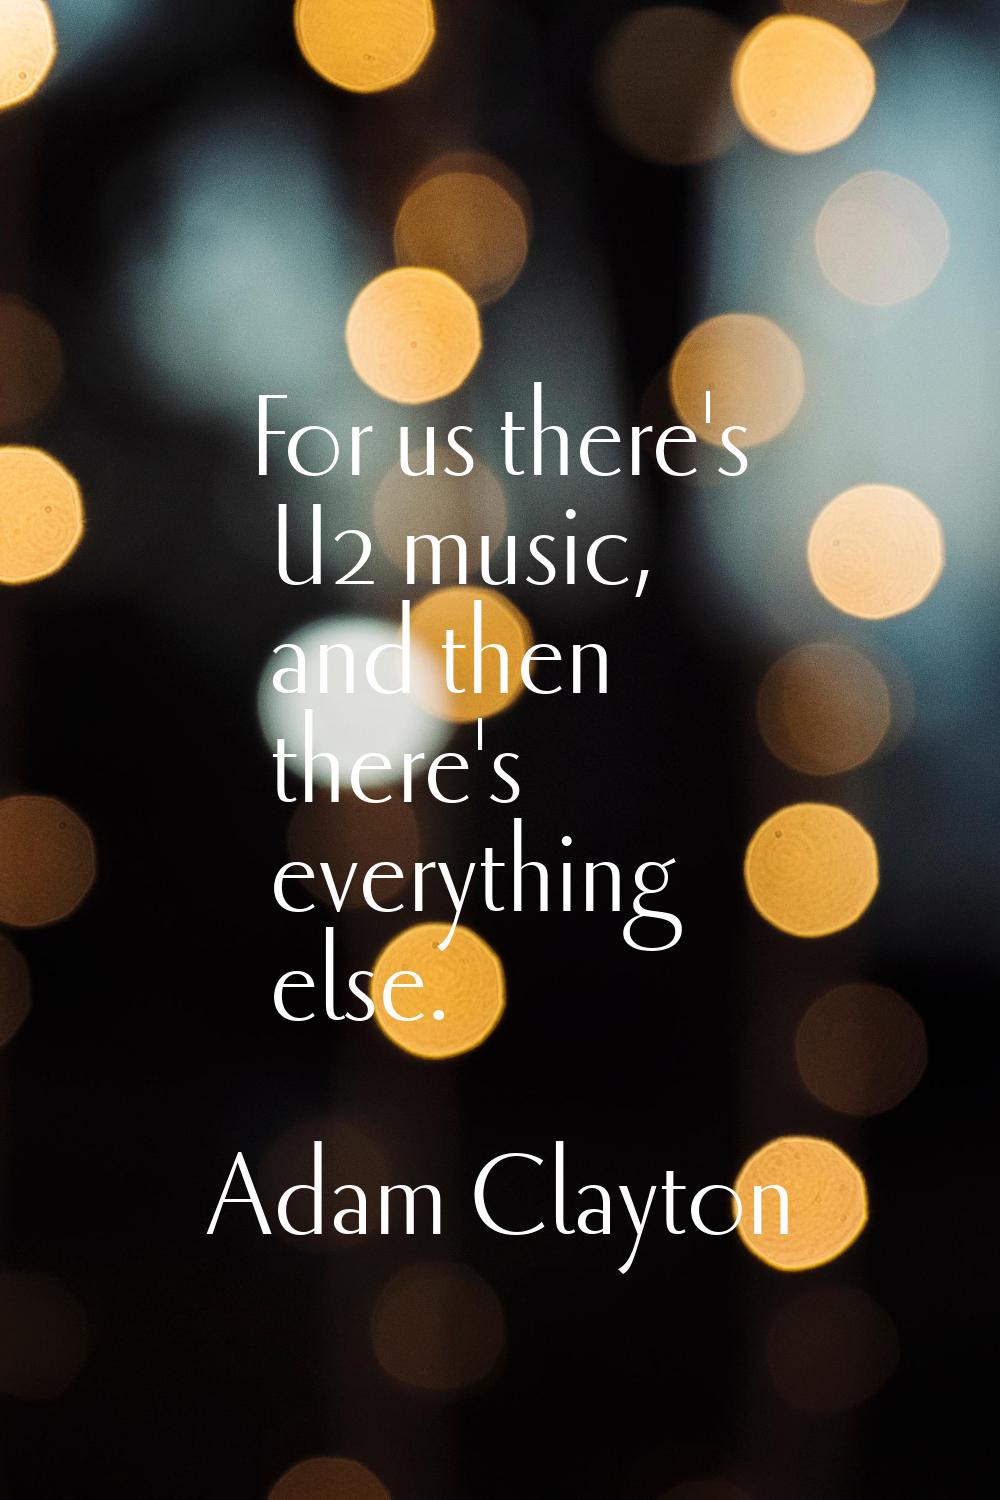 For us there's U2 music, and then there's everything else.